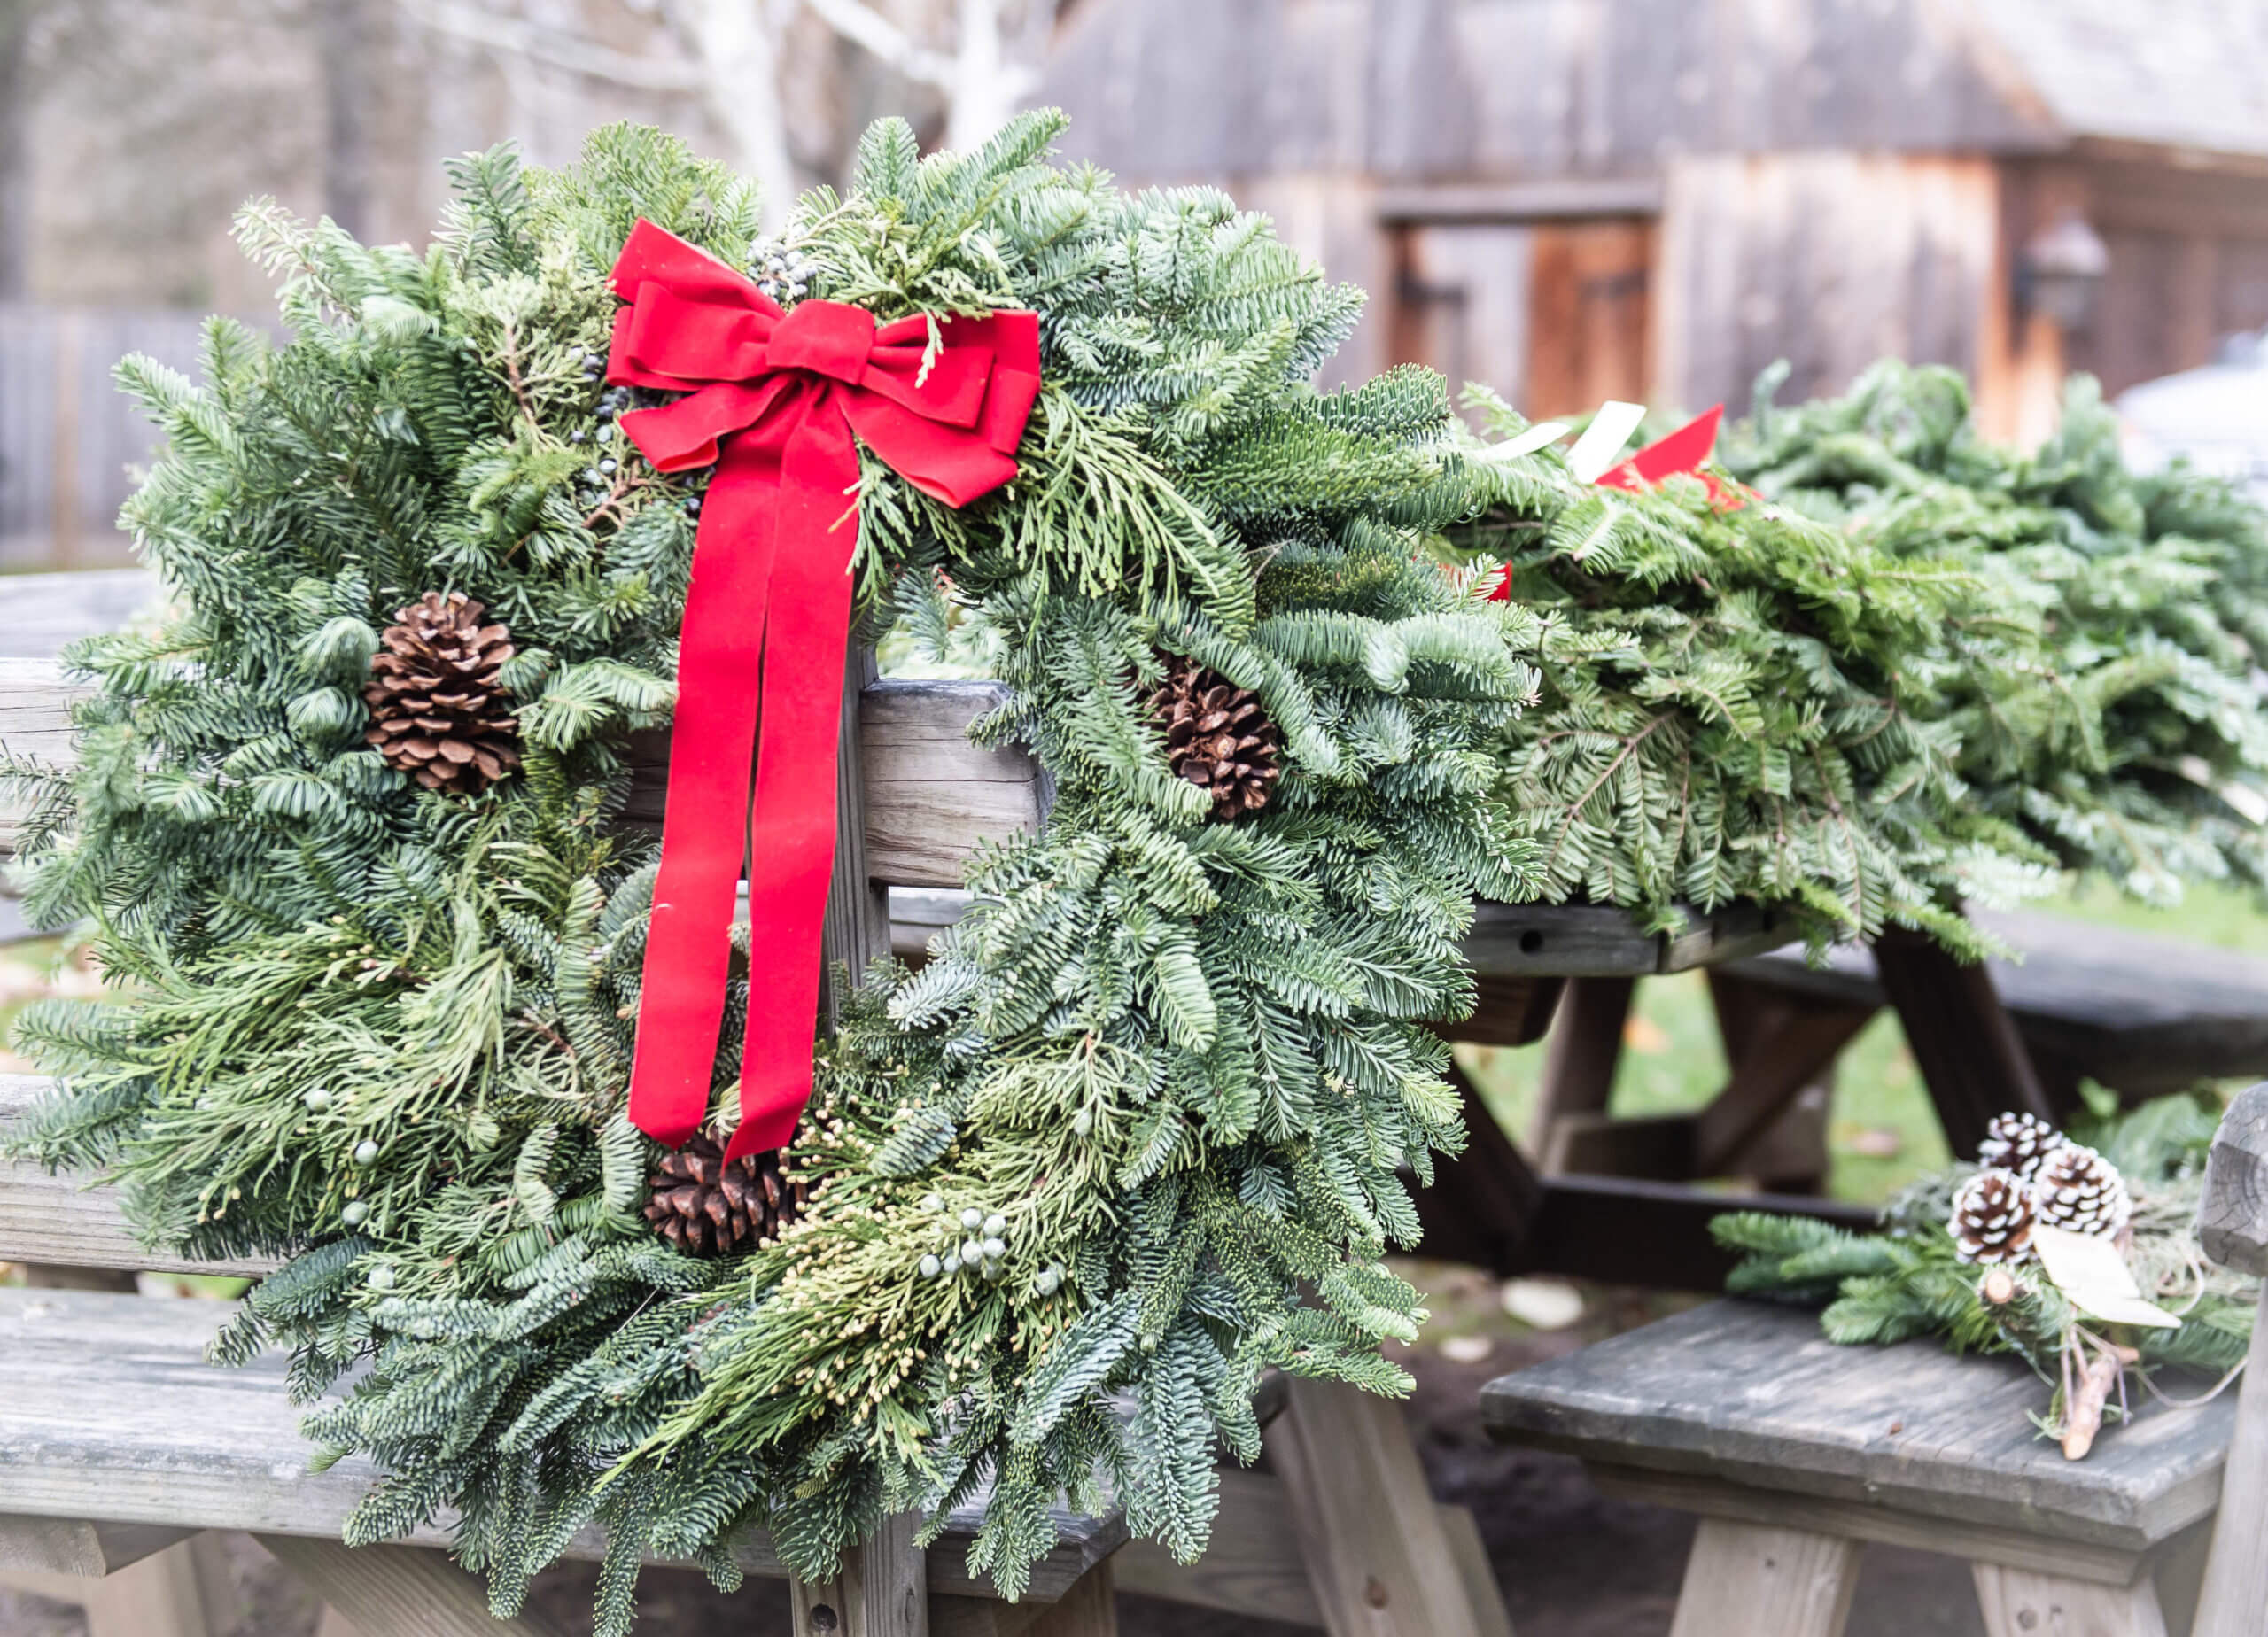 Christmas wreath hanging on the back of a wooden bench.